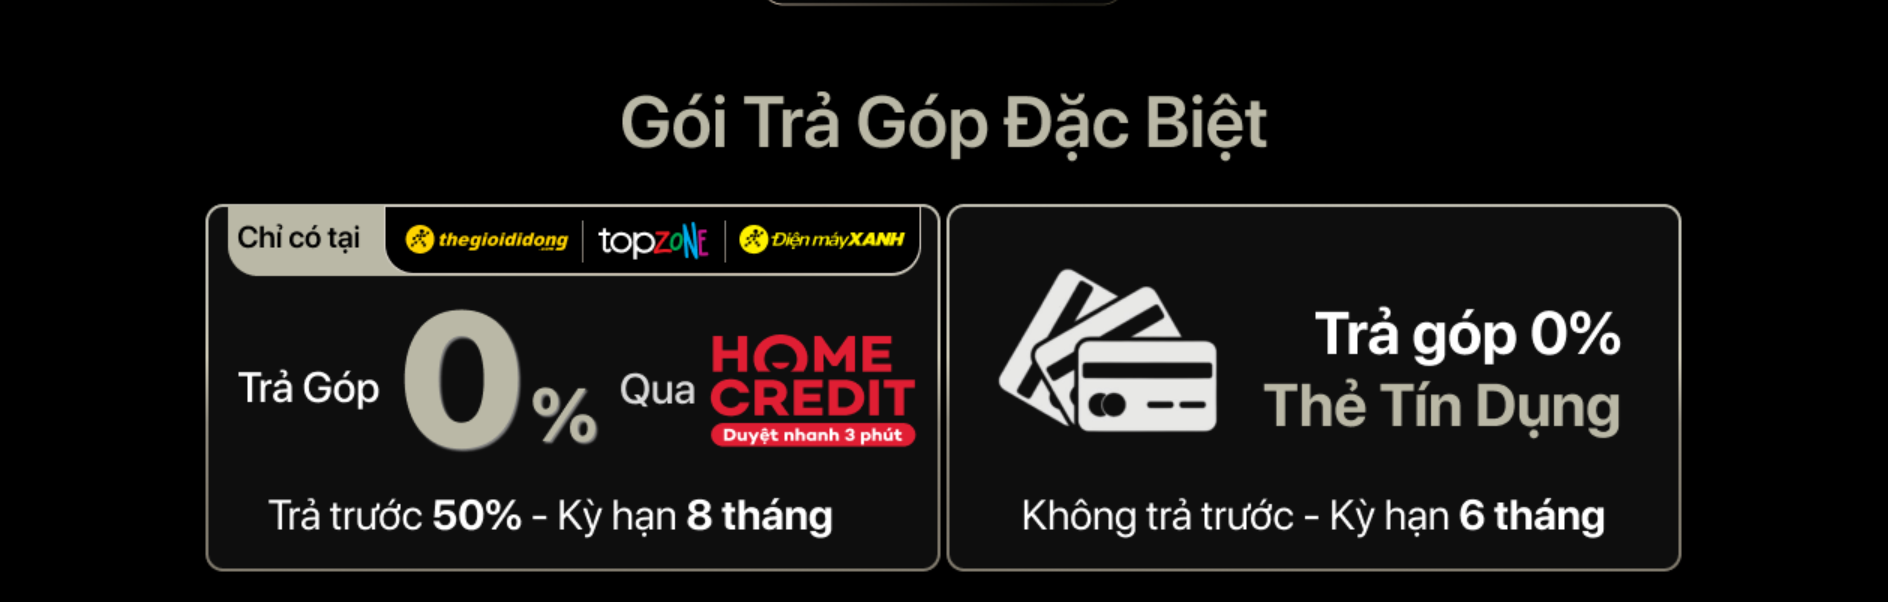 cac-hinh-thuc-tra-gop-iphone-15-tai-topzone.png